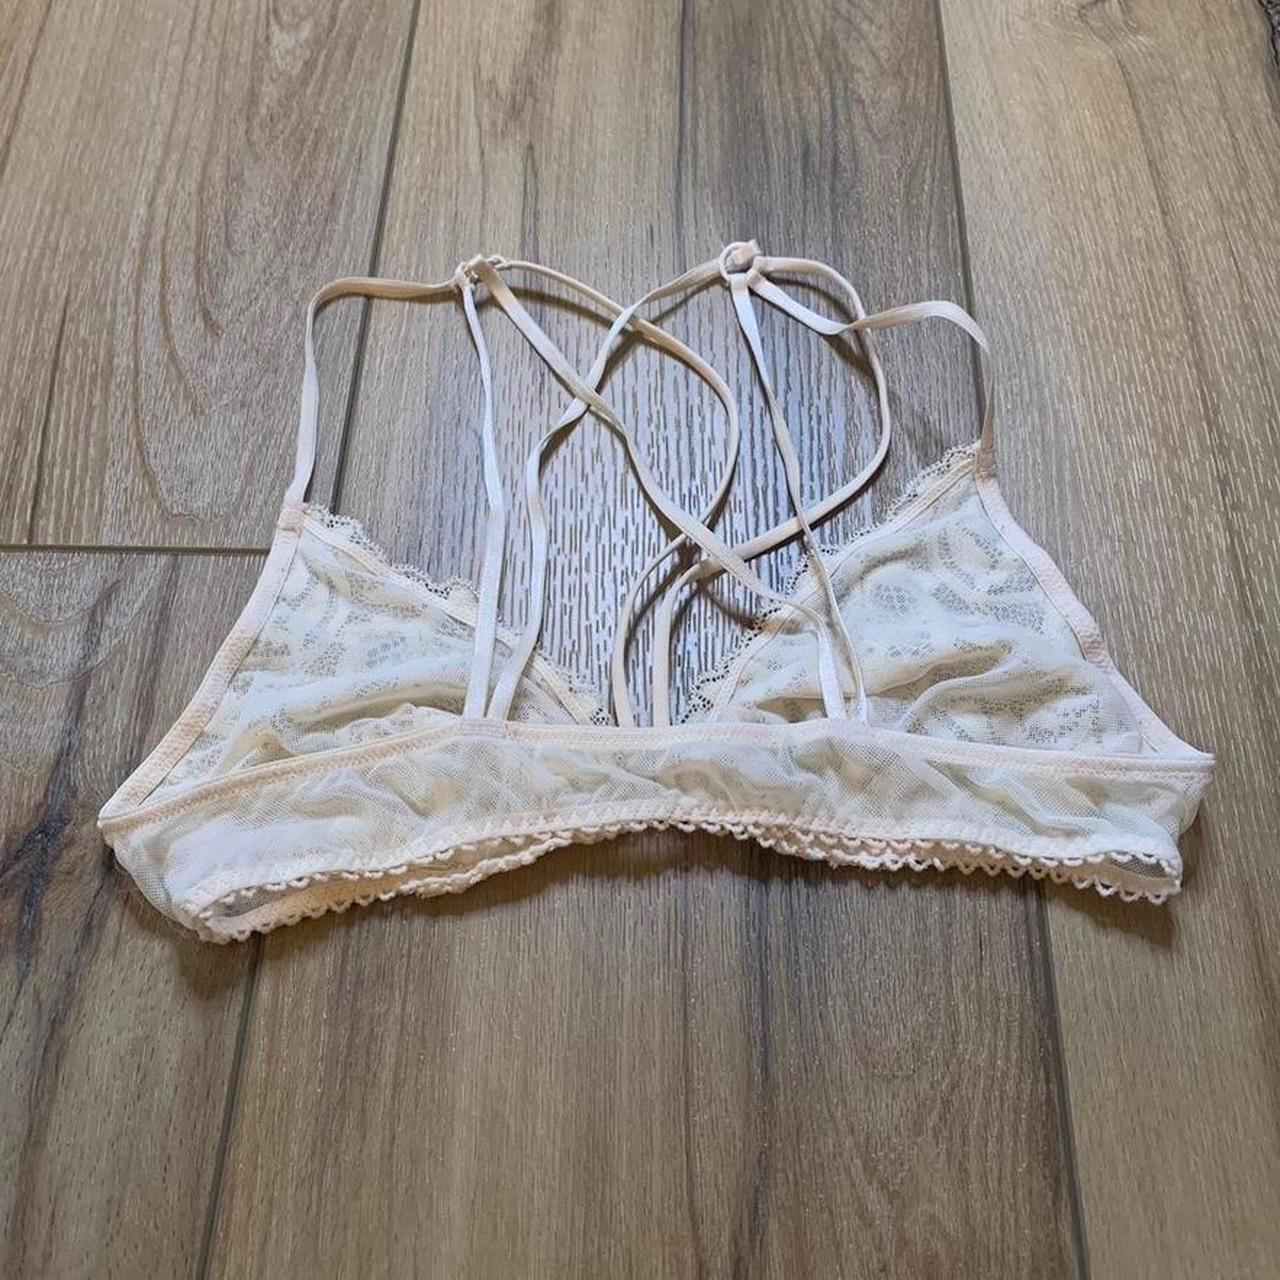 Product Image 2 - Cream Lace Bralette 

Sheer lace